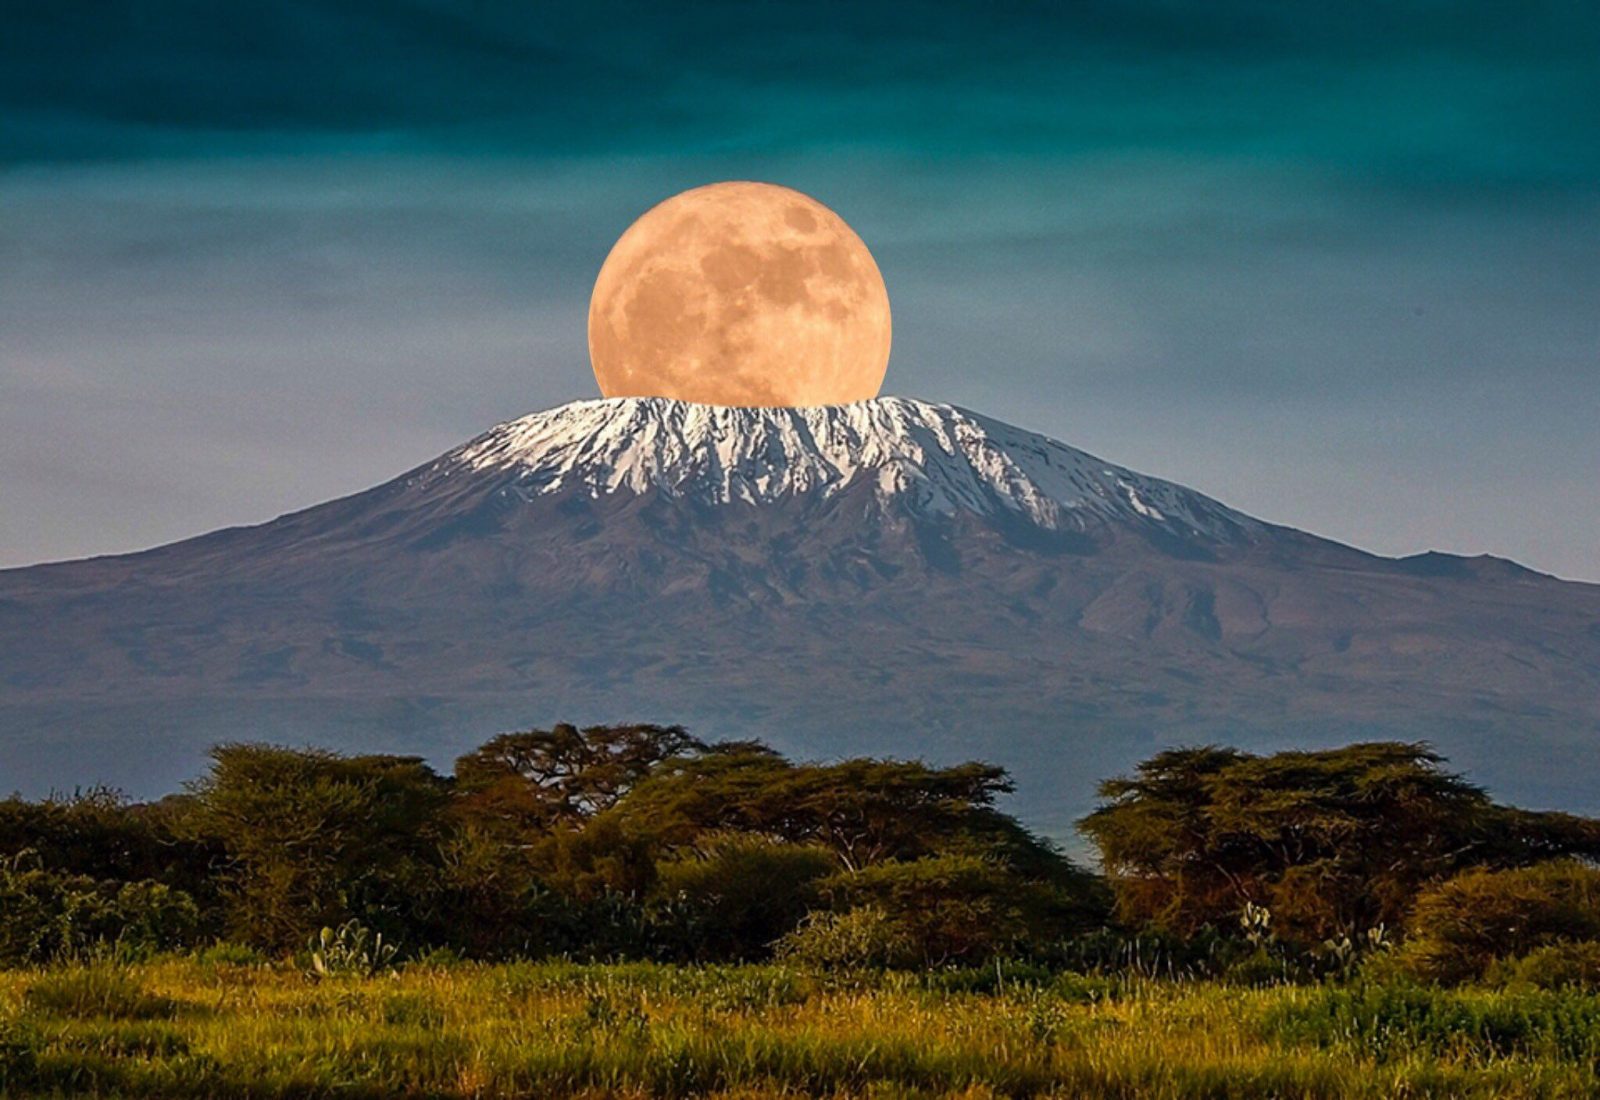 Do You Have Smarts to Pass This World Geography Quiz With Flying Colors ? Mount Kilimanjaro full moon